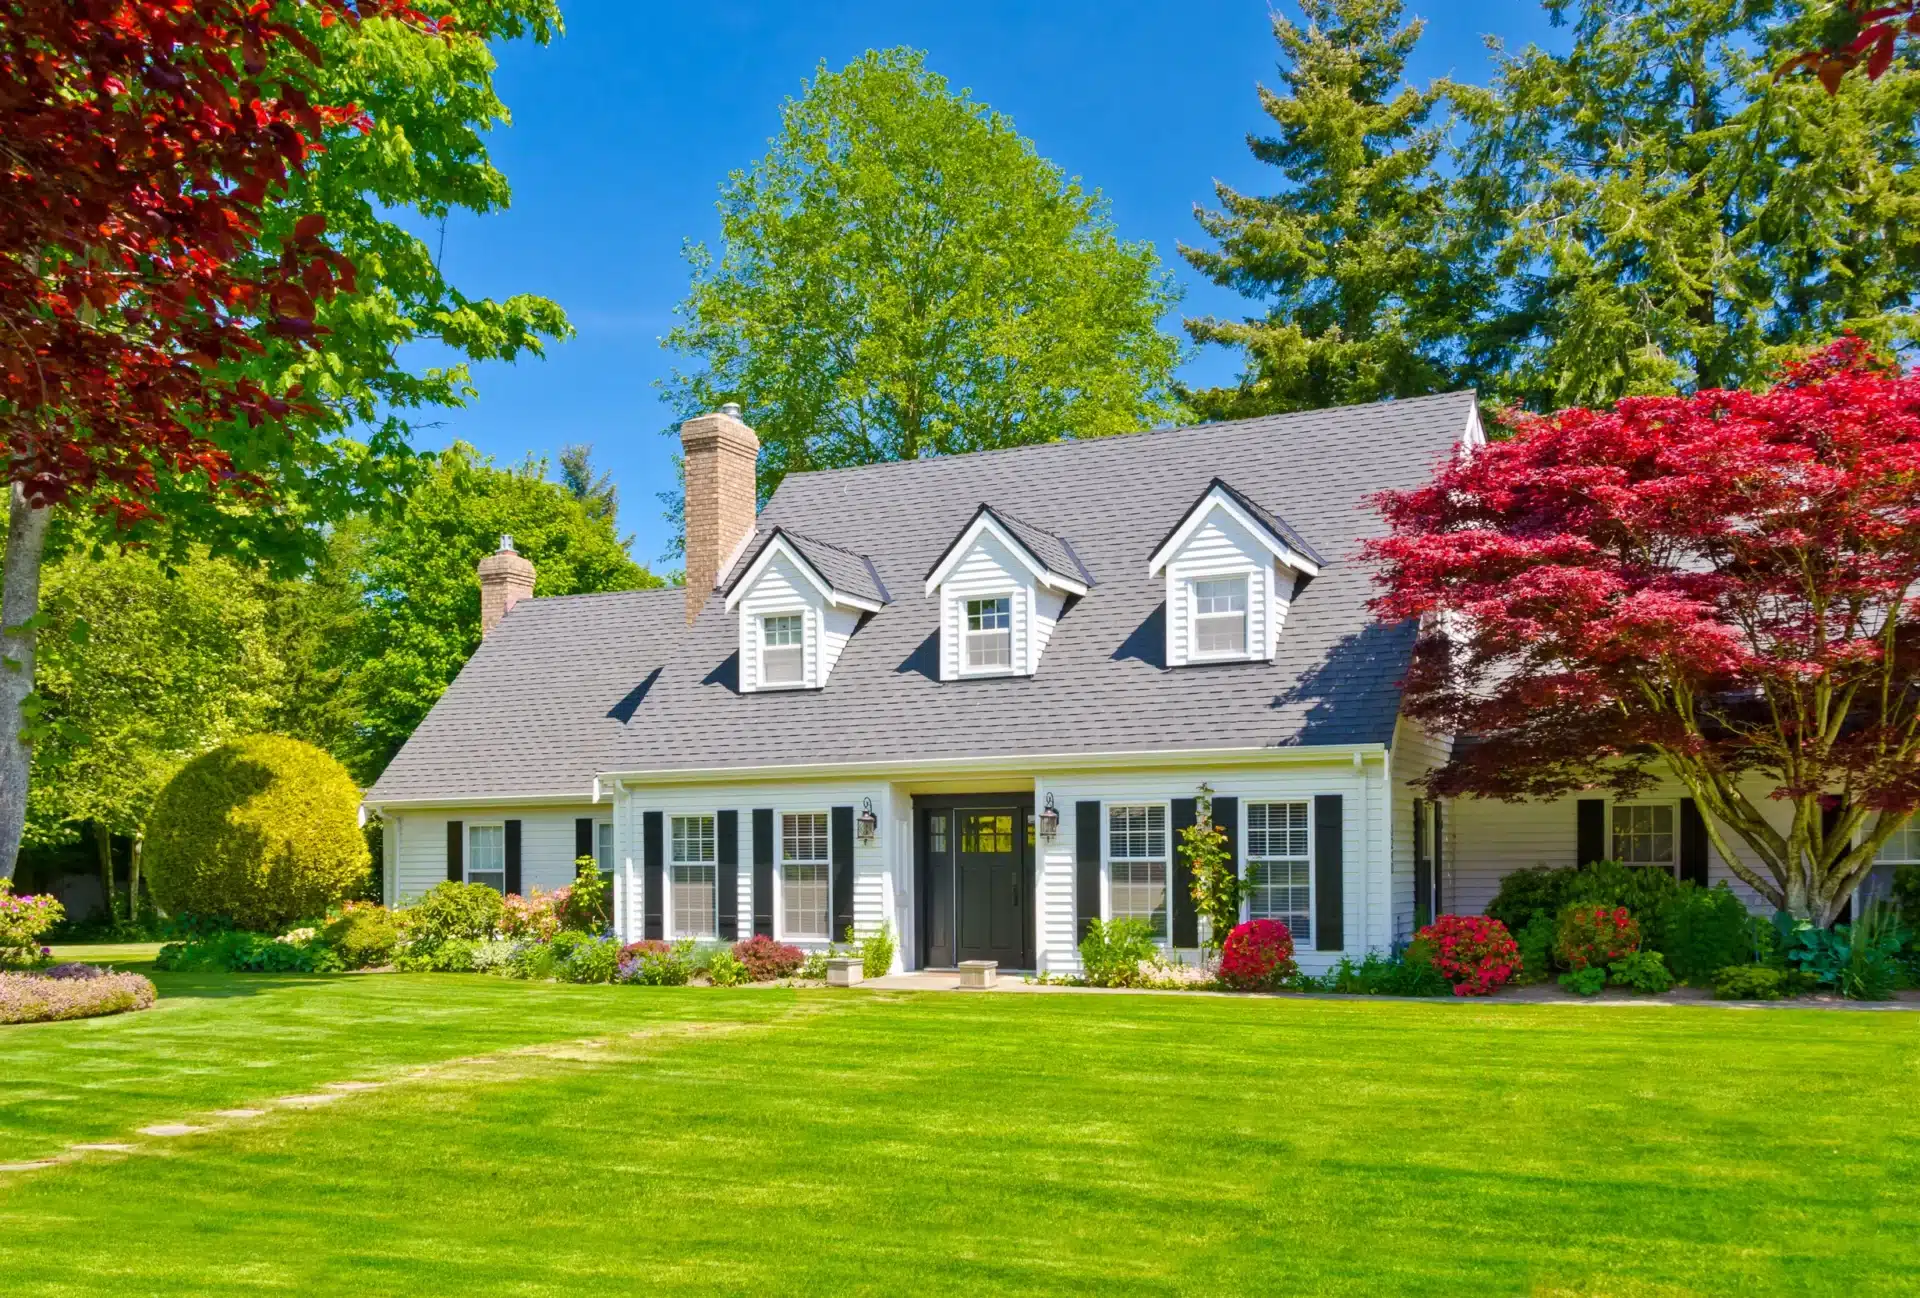 Cape Cod style homes are an iconic and enduring architectural design that has been a part of American culture for centuries.